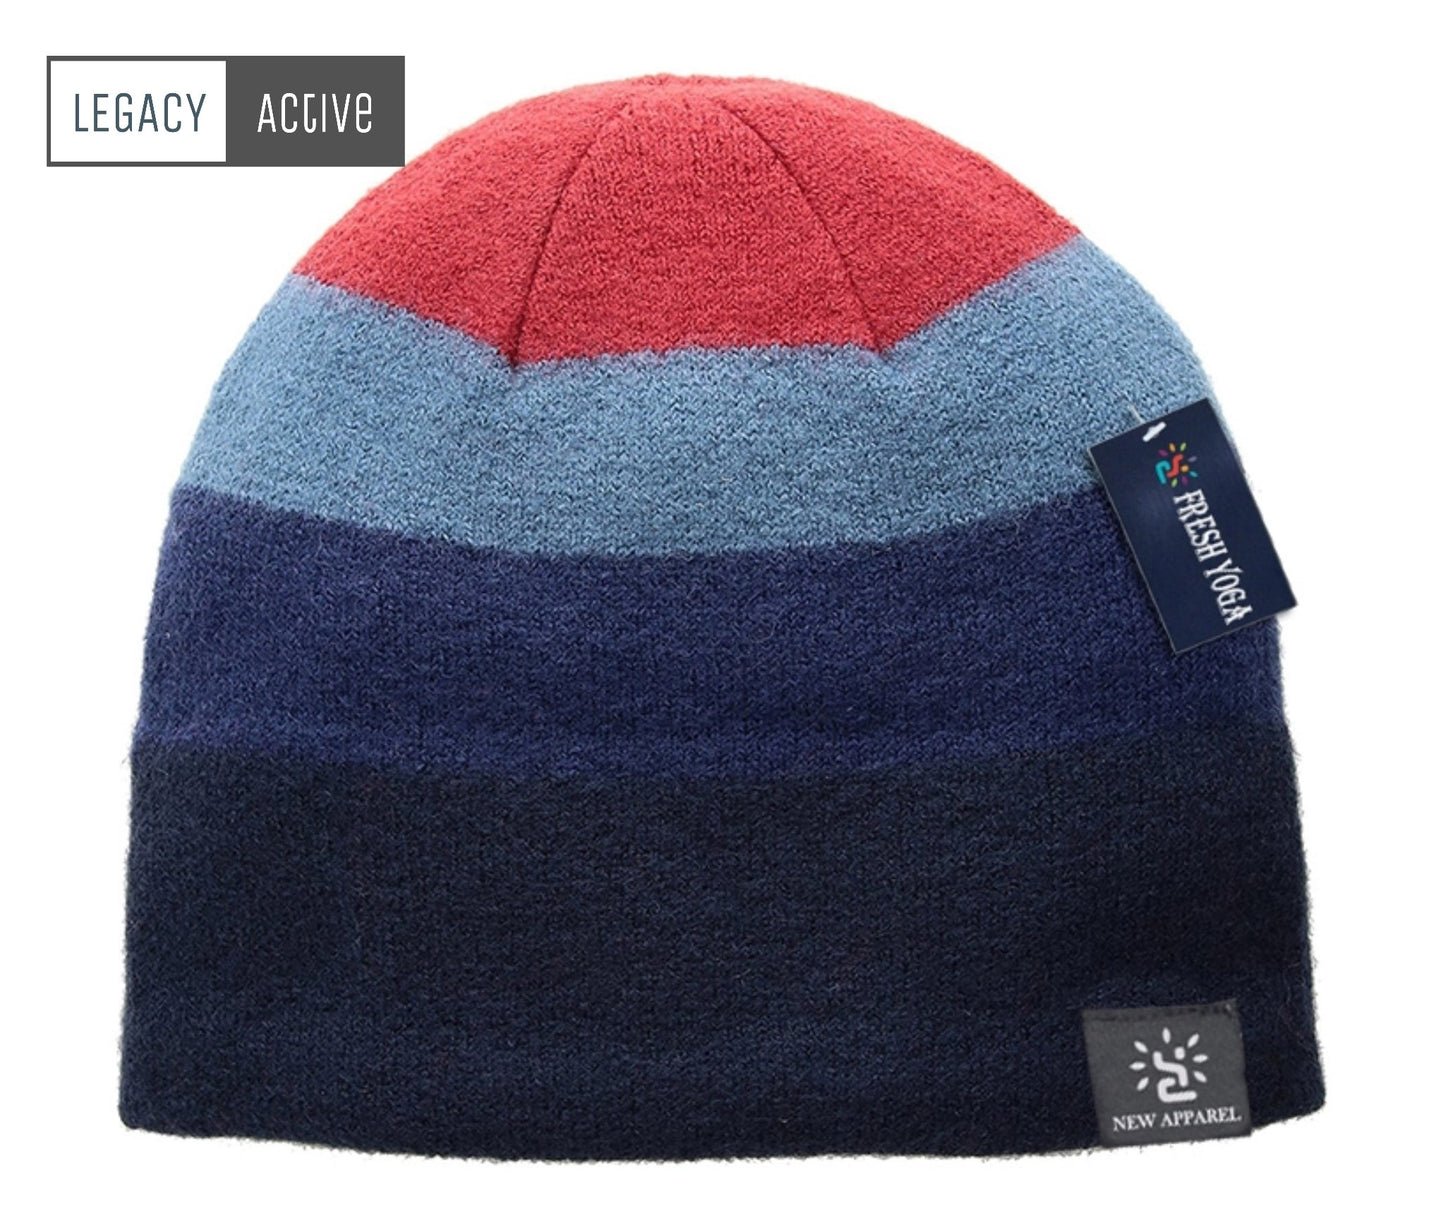 LEGACY ACTIVE 100% Wool Beanie